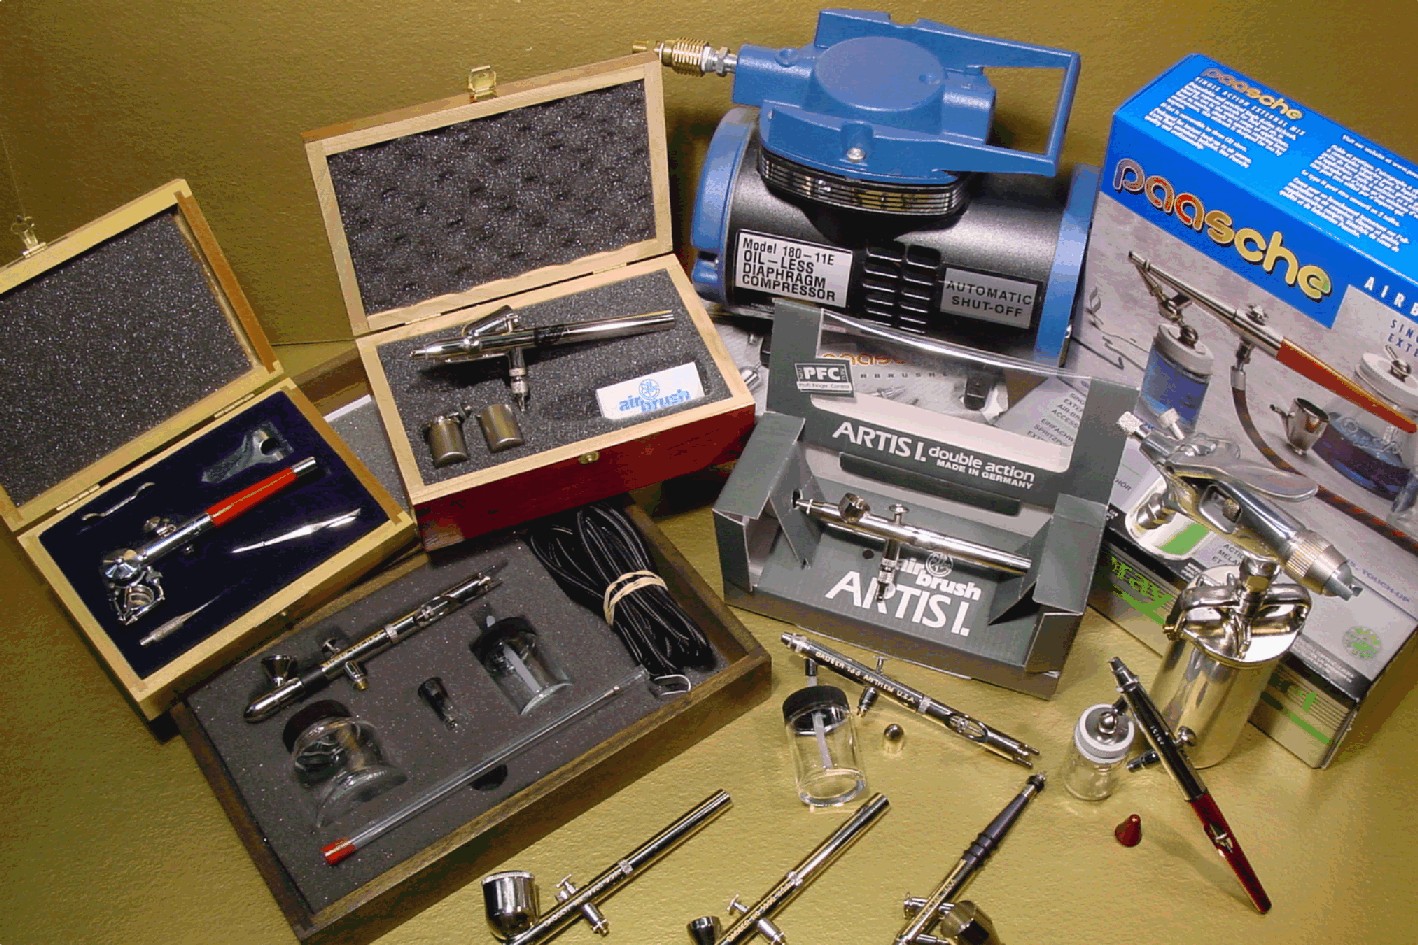 Paasche Airbrush - High quality affordable airbrushes made in USA